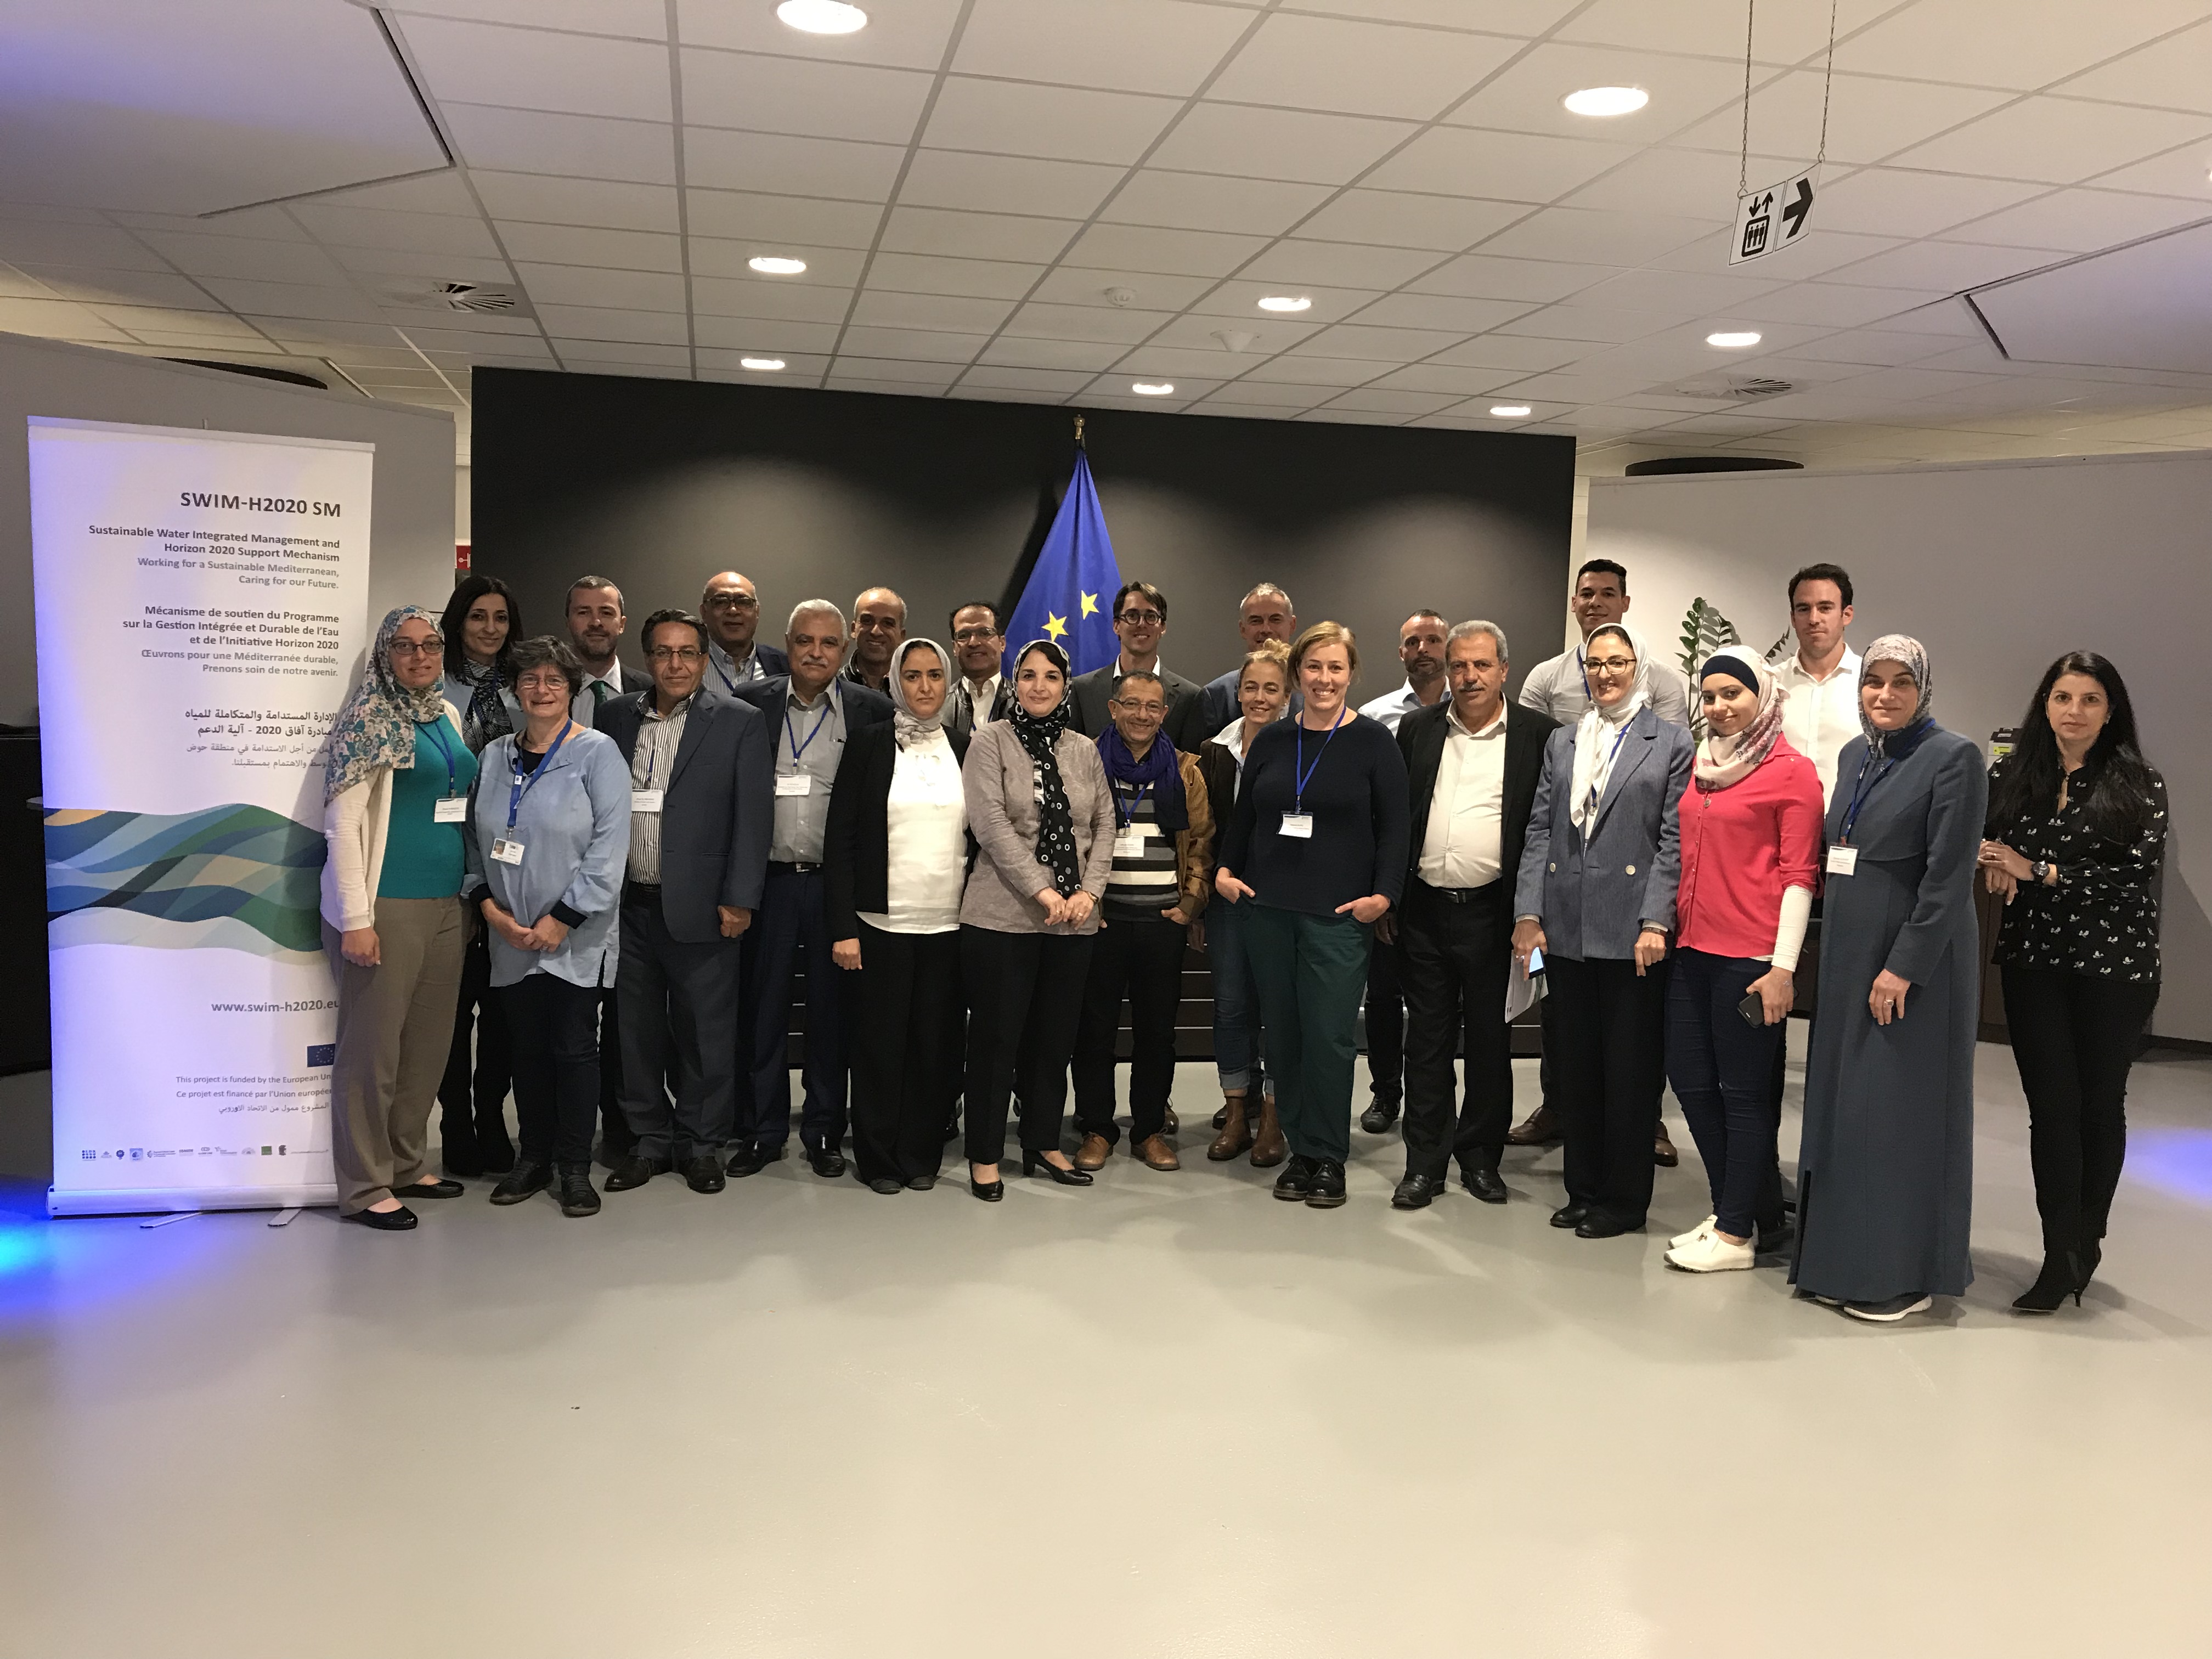 2-3 October 2018, Brussels, Belgium – SWIM-H2020 SM Regional On-Site Training on “Good water governance, focusing on regulatory aspects and the design, monitoring and enforcement of policies”